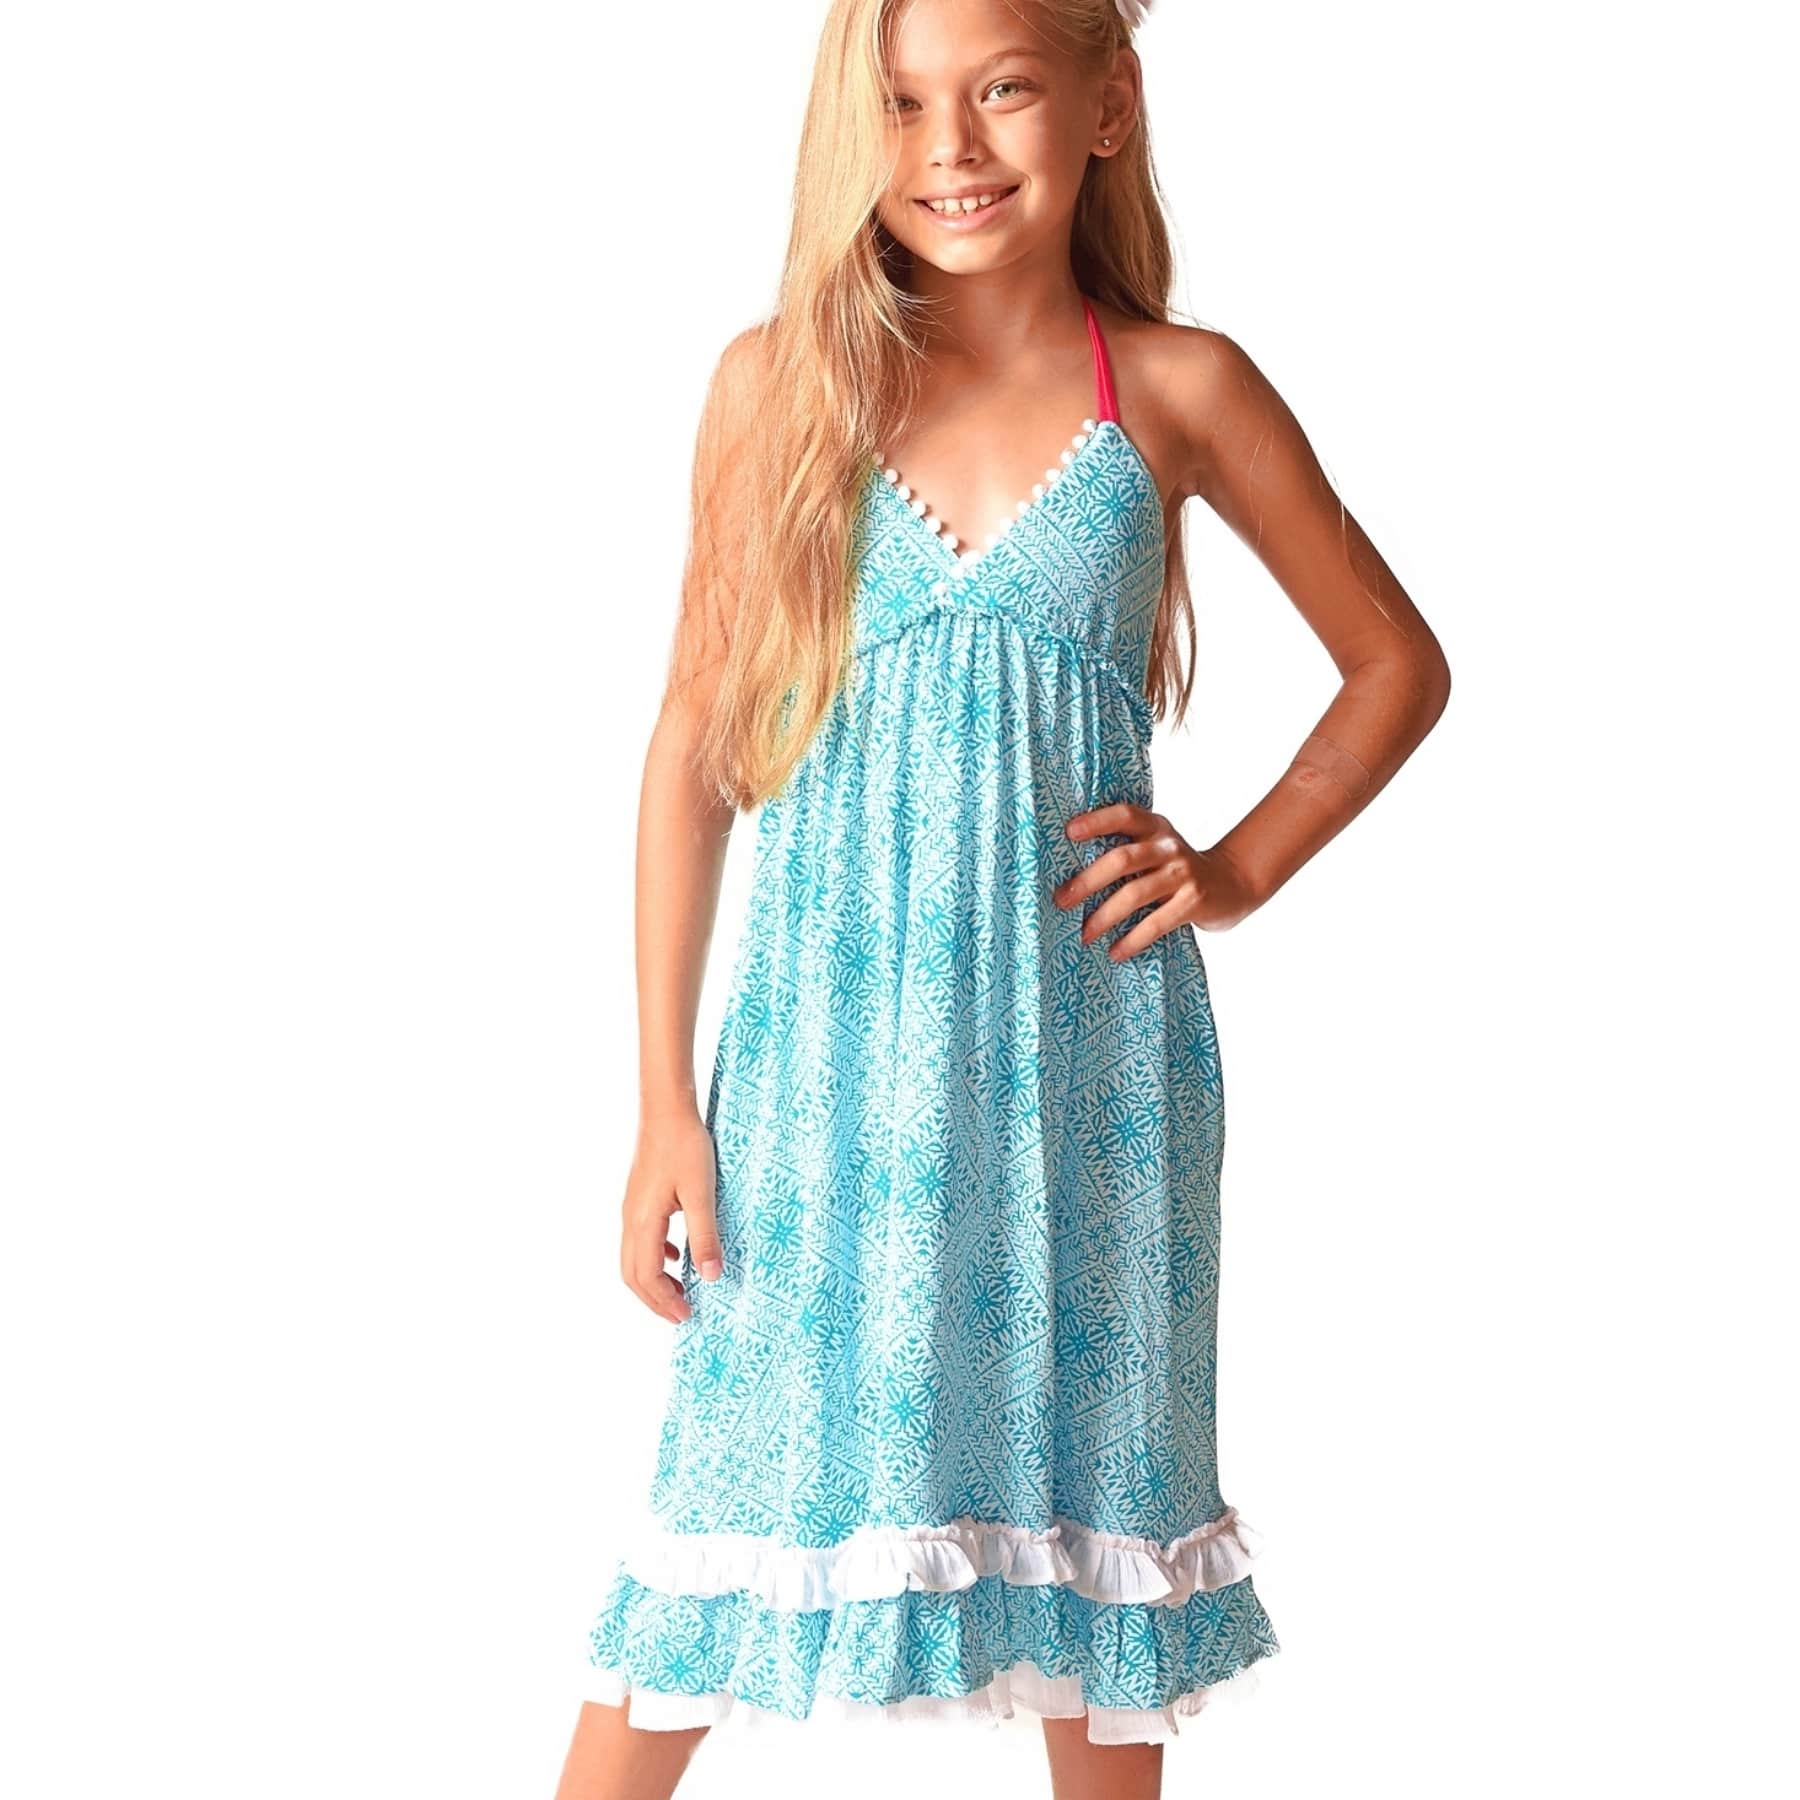 Green and white cotton jersey long beach dress with V-neck, ruffles, fuchsia pink elastic strap around the neck for girls from the children's fashion brand LA FAUTE A VOLTAIRE